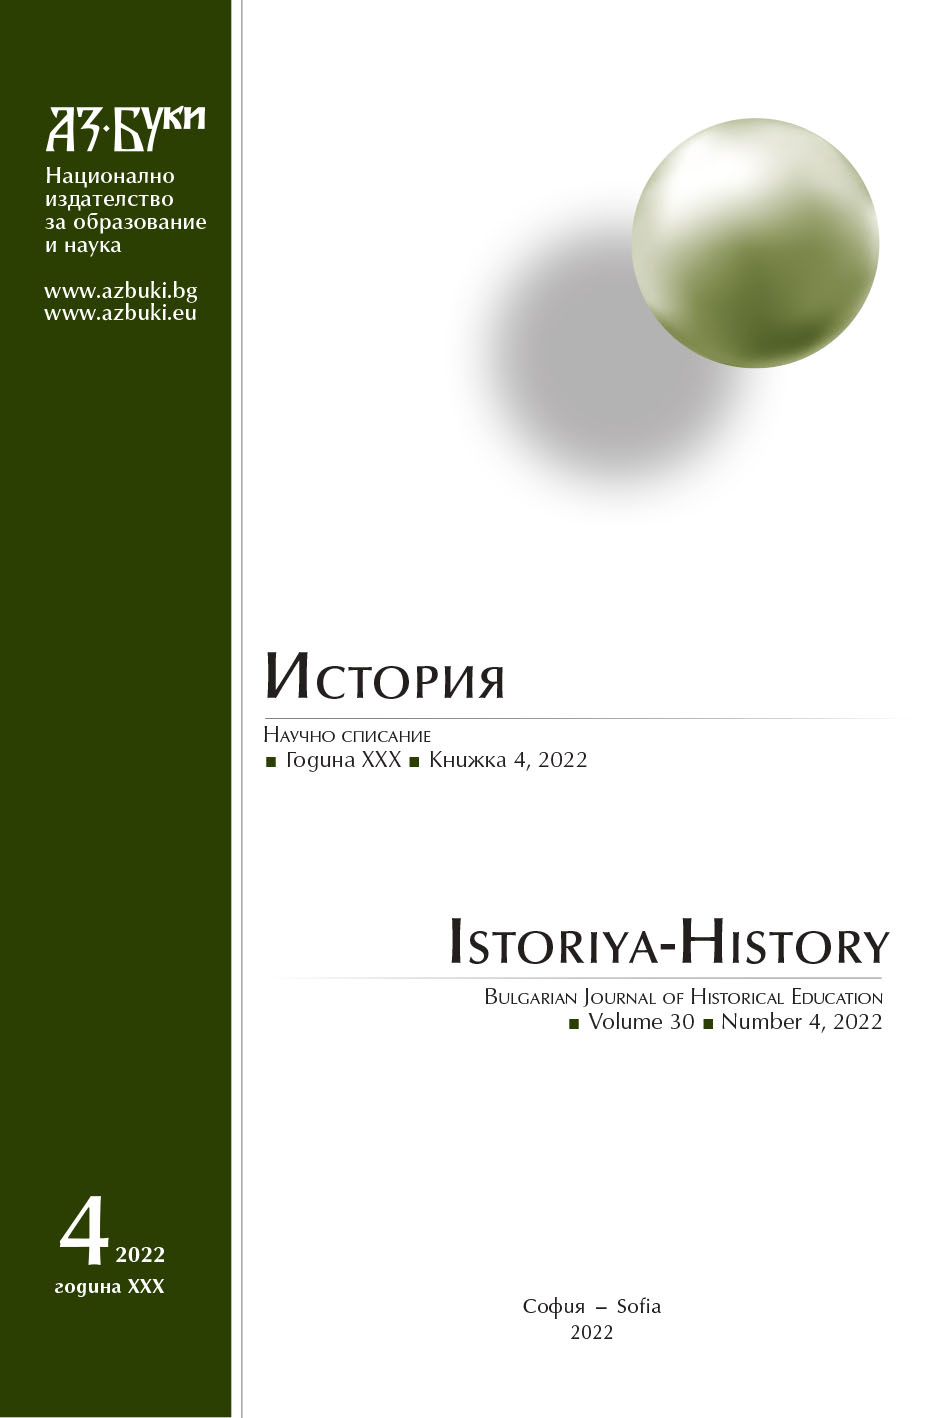 A New Research on the U.S. Intelligence and Bulgaria (1941 – 1991) Cover Image